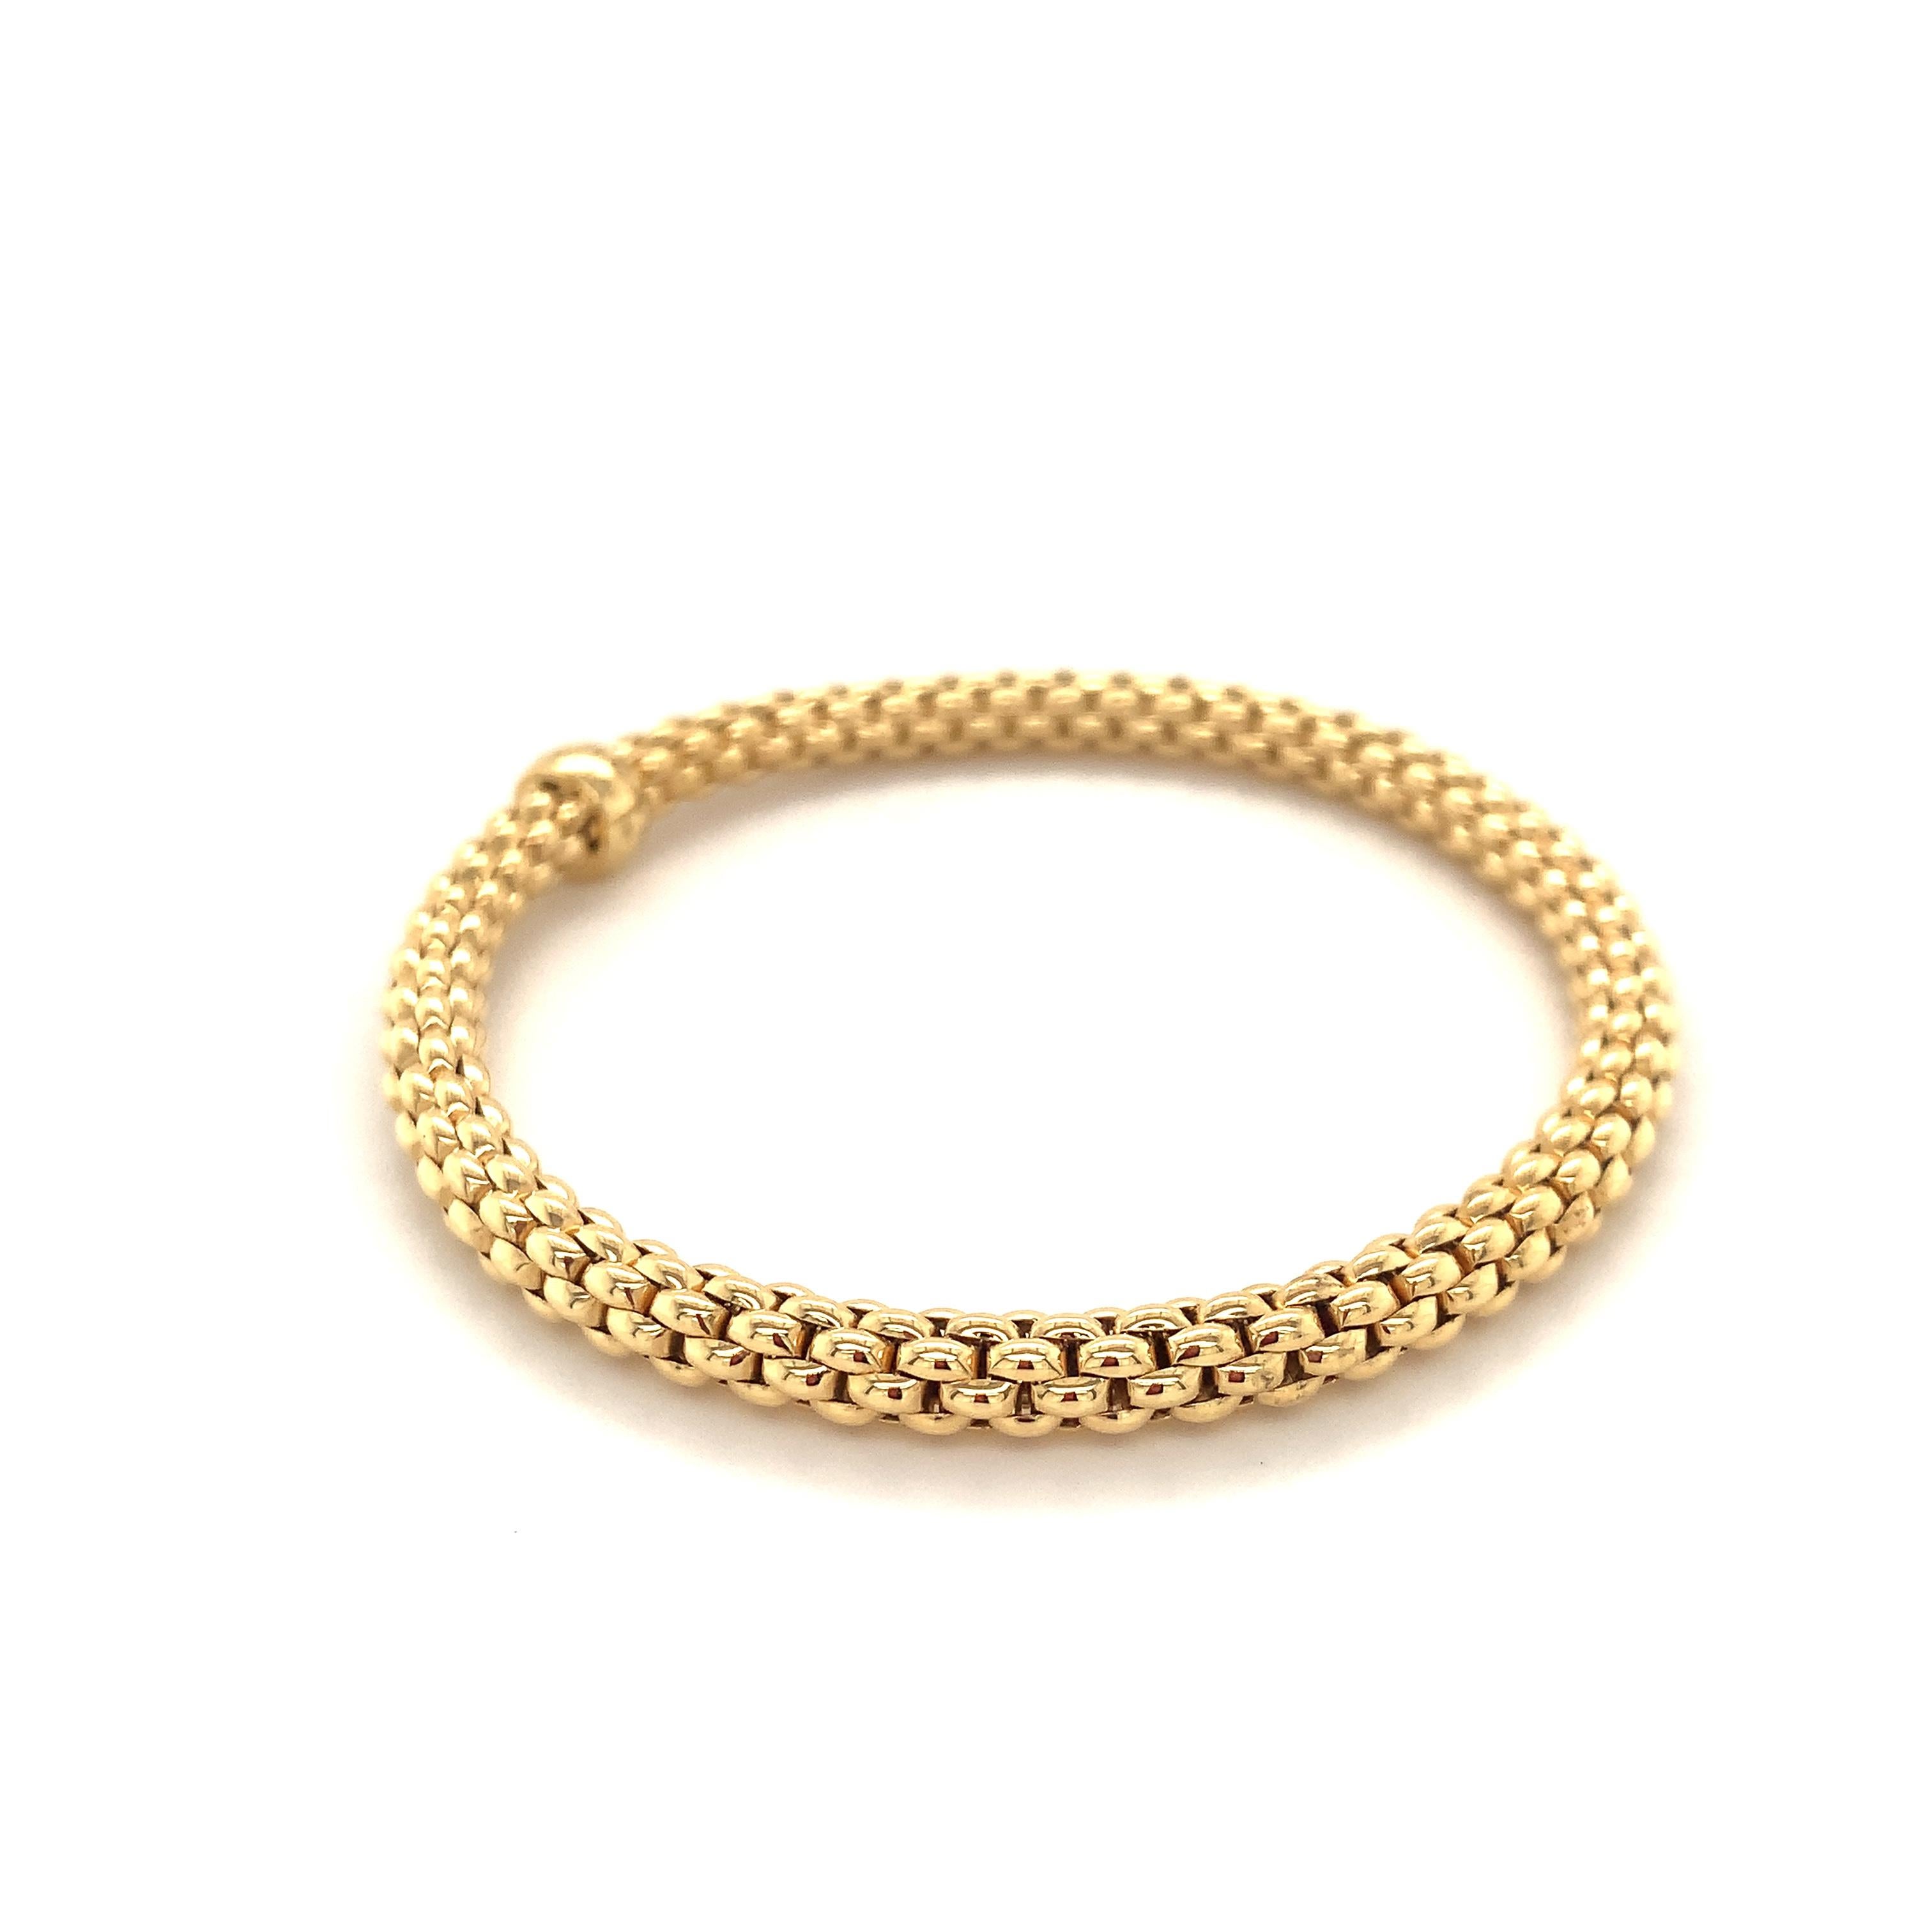 Modern Fope Bracelet 18K Yellow Gold with Solid Gold Rondel 620BM-G